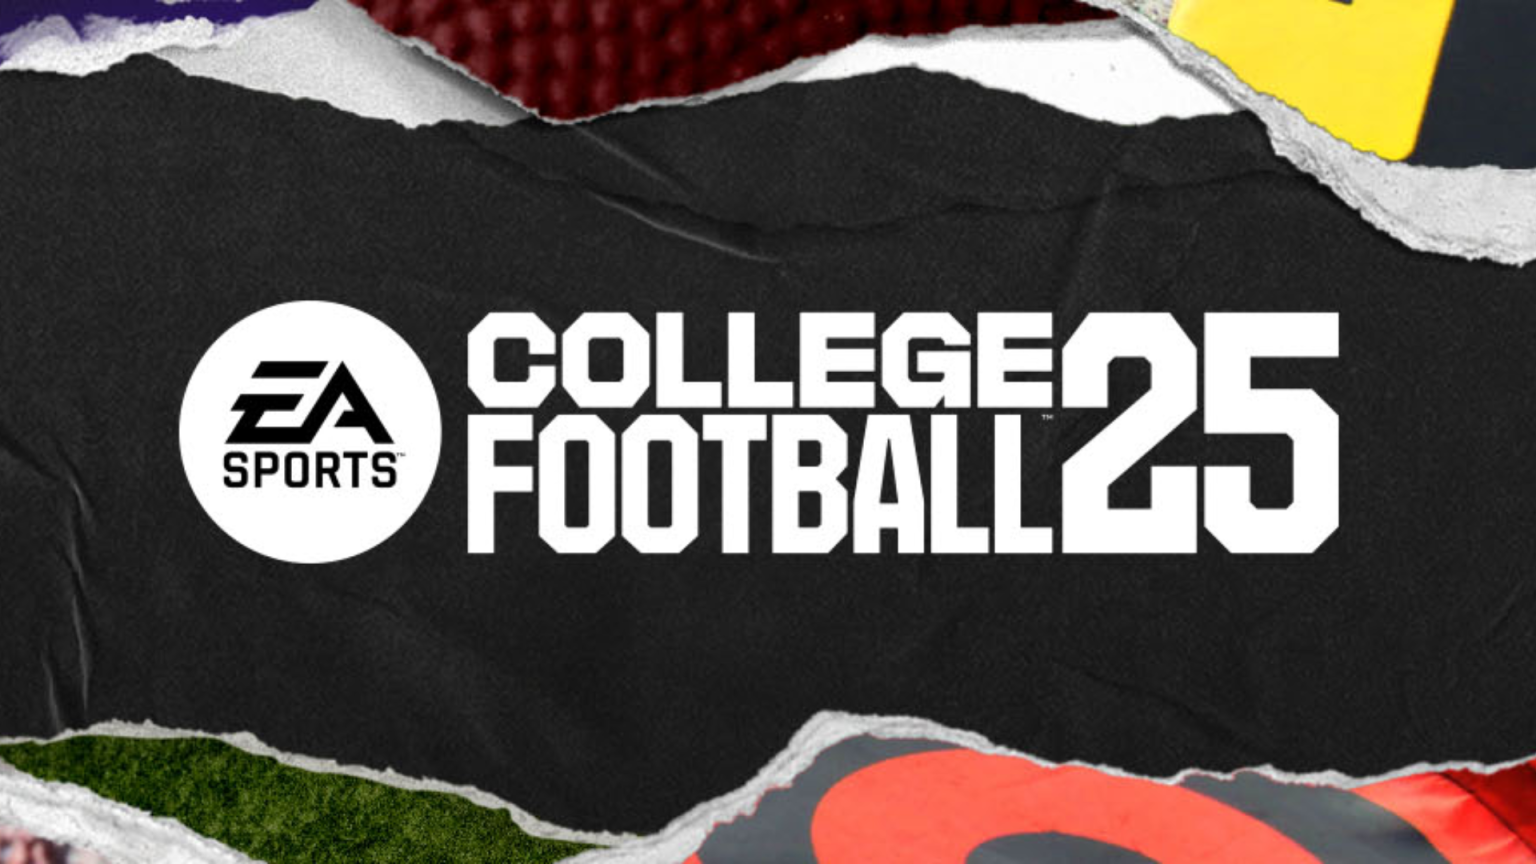 Eagerly Anticipated: Multiple Cover Athletes Rumored for New EA College Football 25 Game